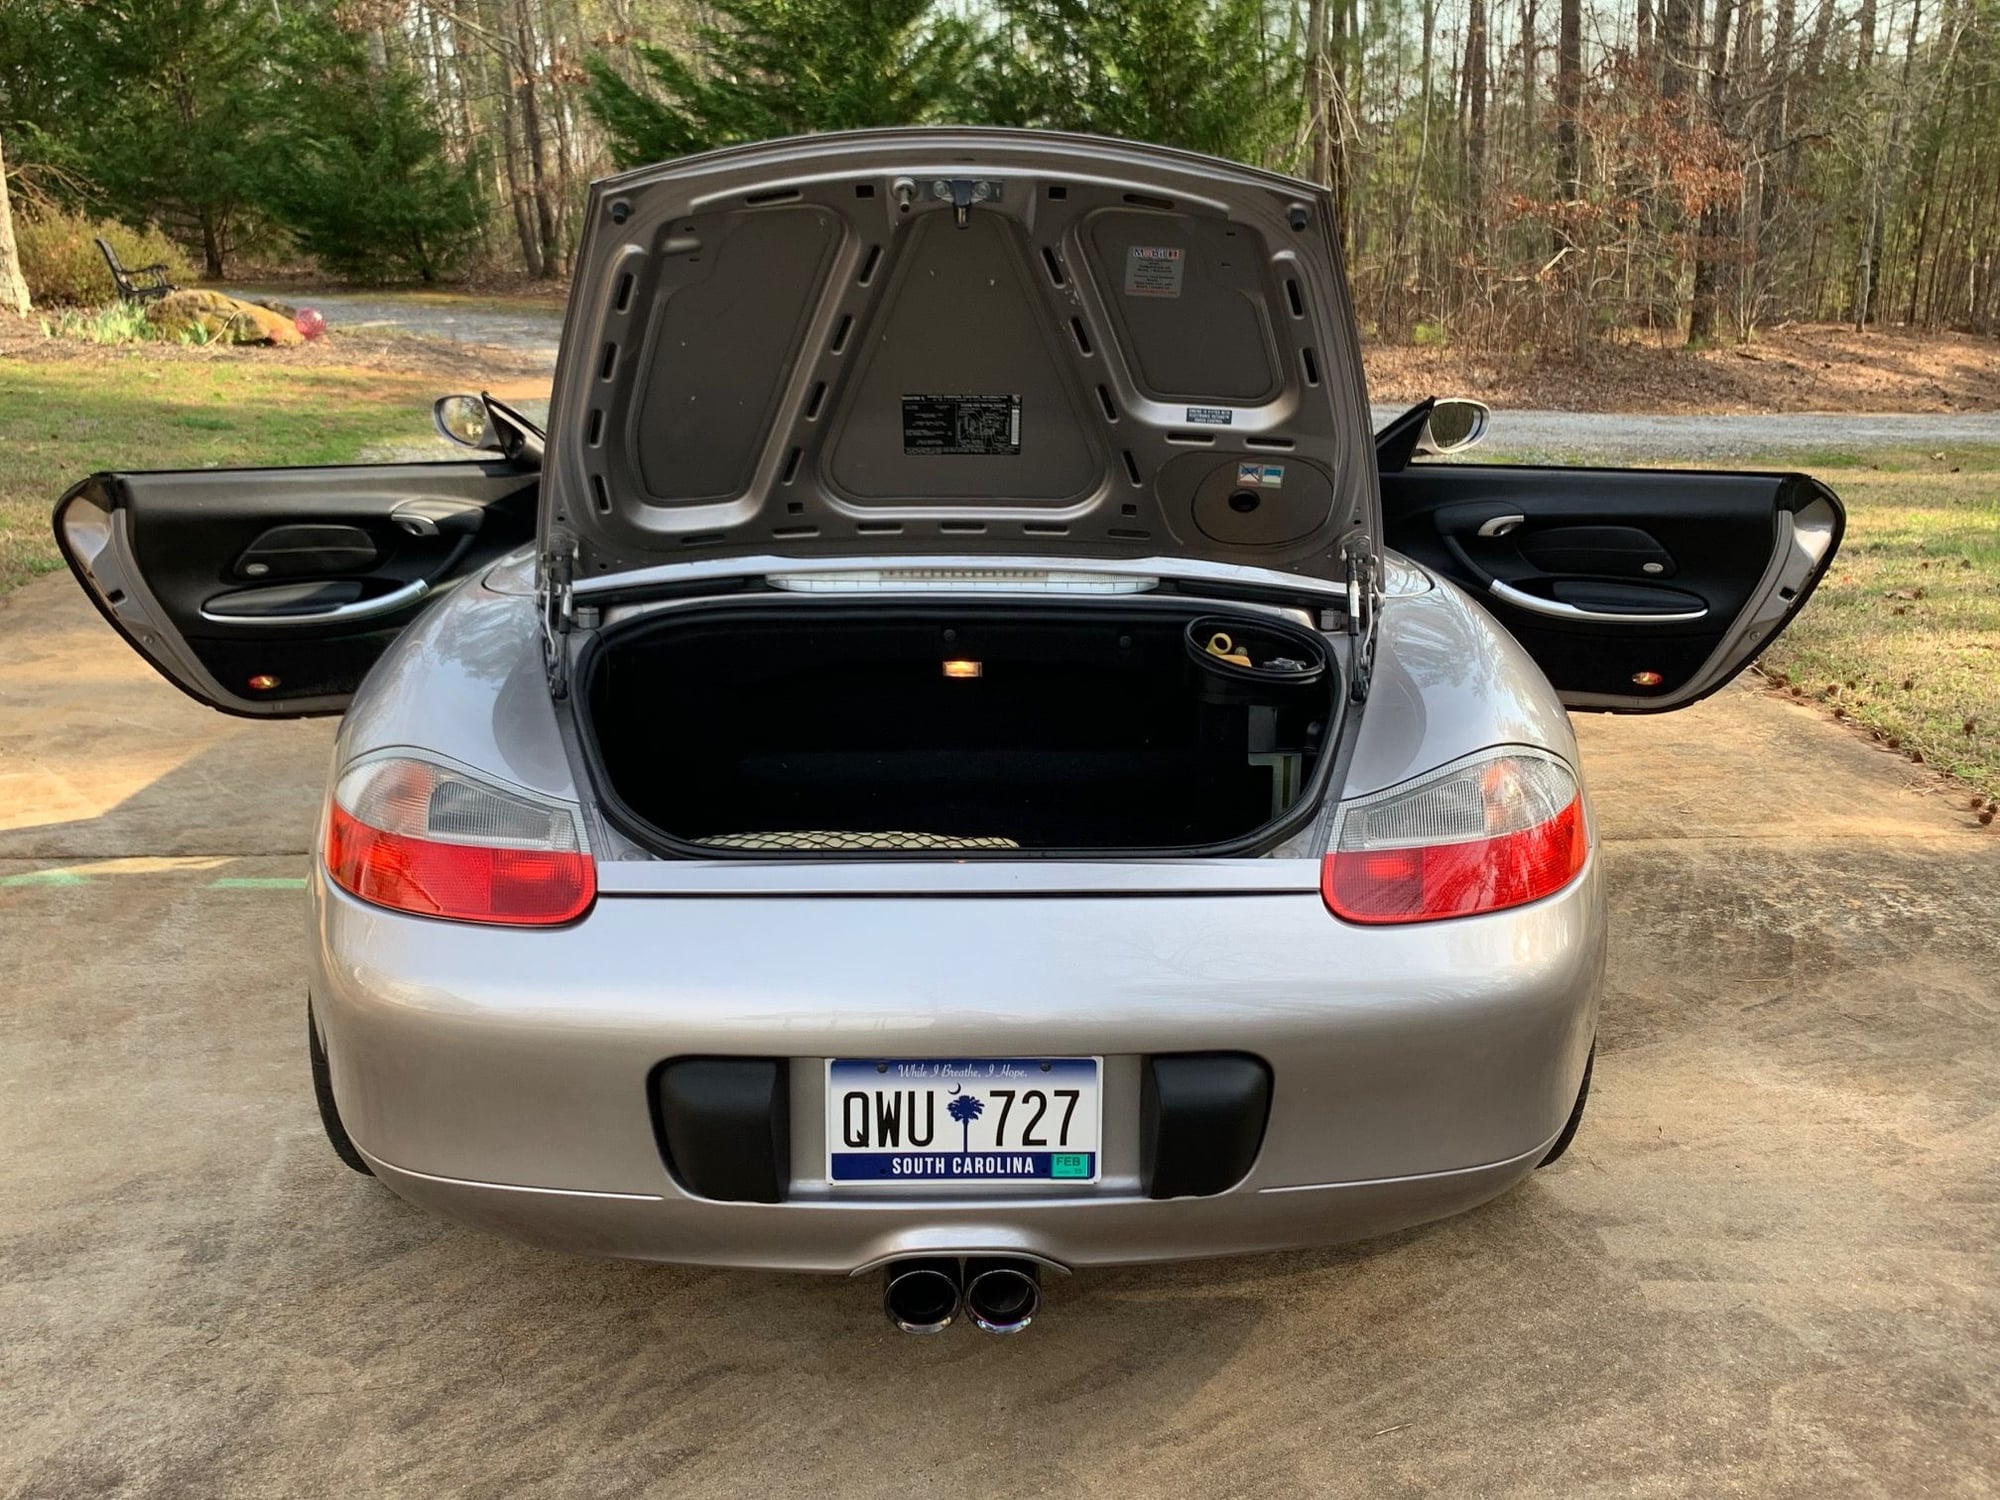 2001 Porsche Boxster - 2001 Boxster S 6-Speed Meridian Metallic 62k miles - Used - VIN WP0CB29831U665156 - 62,000 Miles - 6 cyl - 2WD - Manual - Convertible - Other - Easley, SC 29640, United States